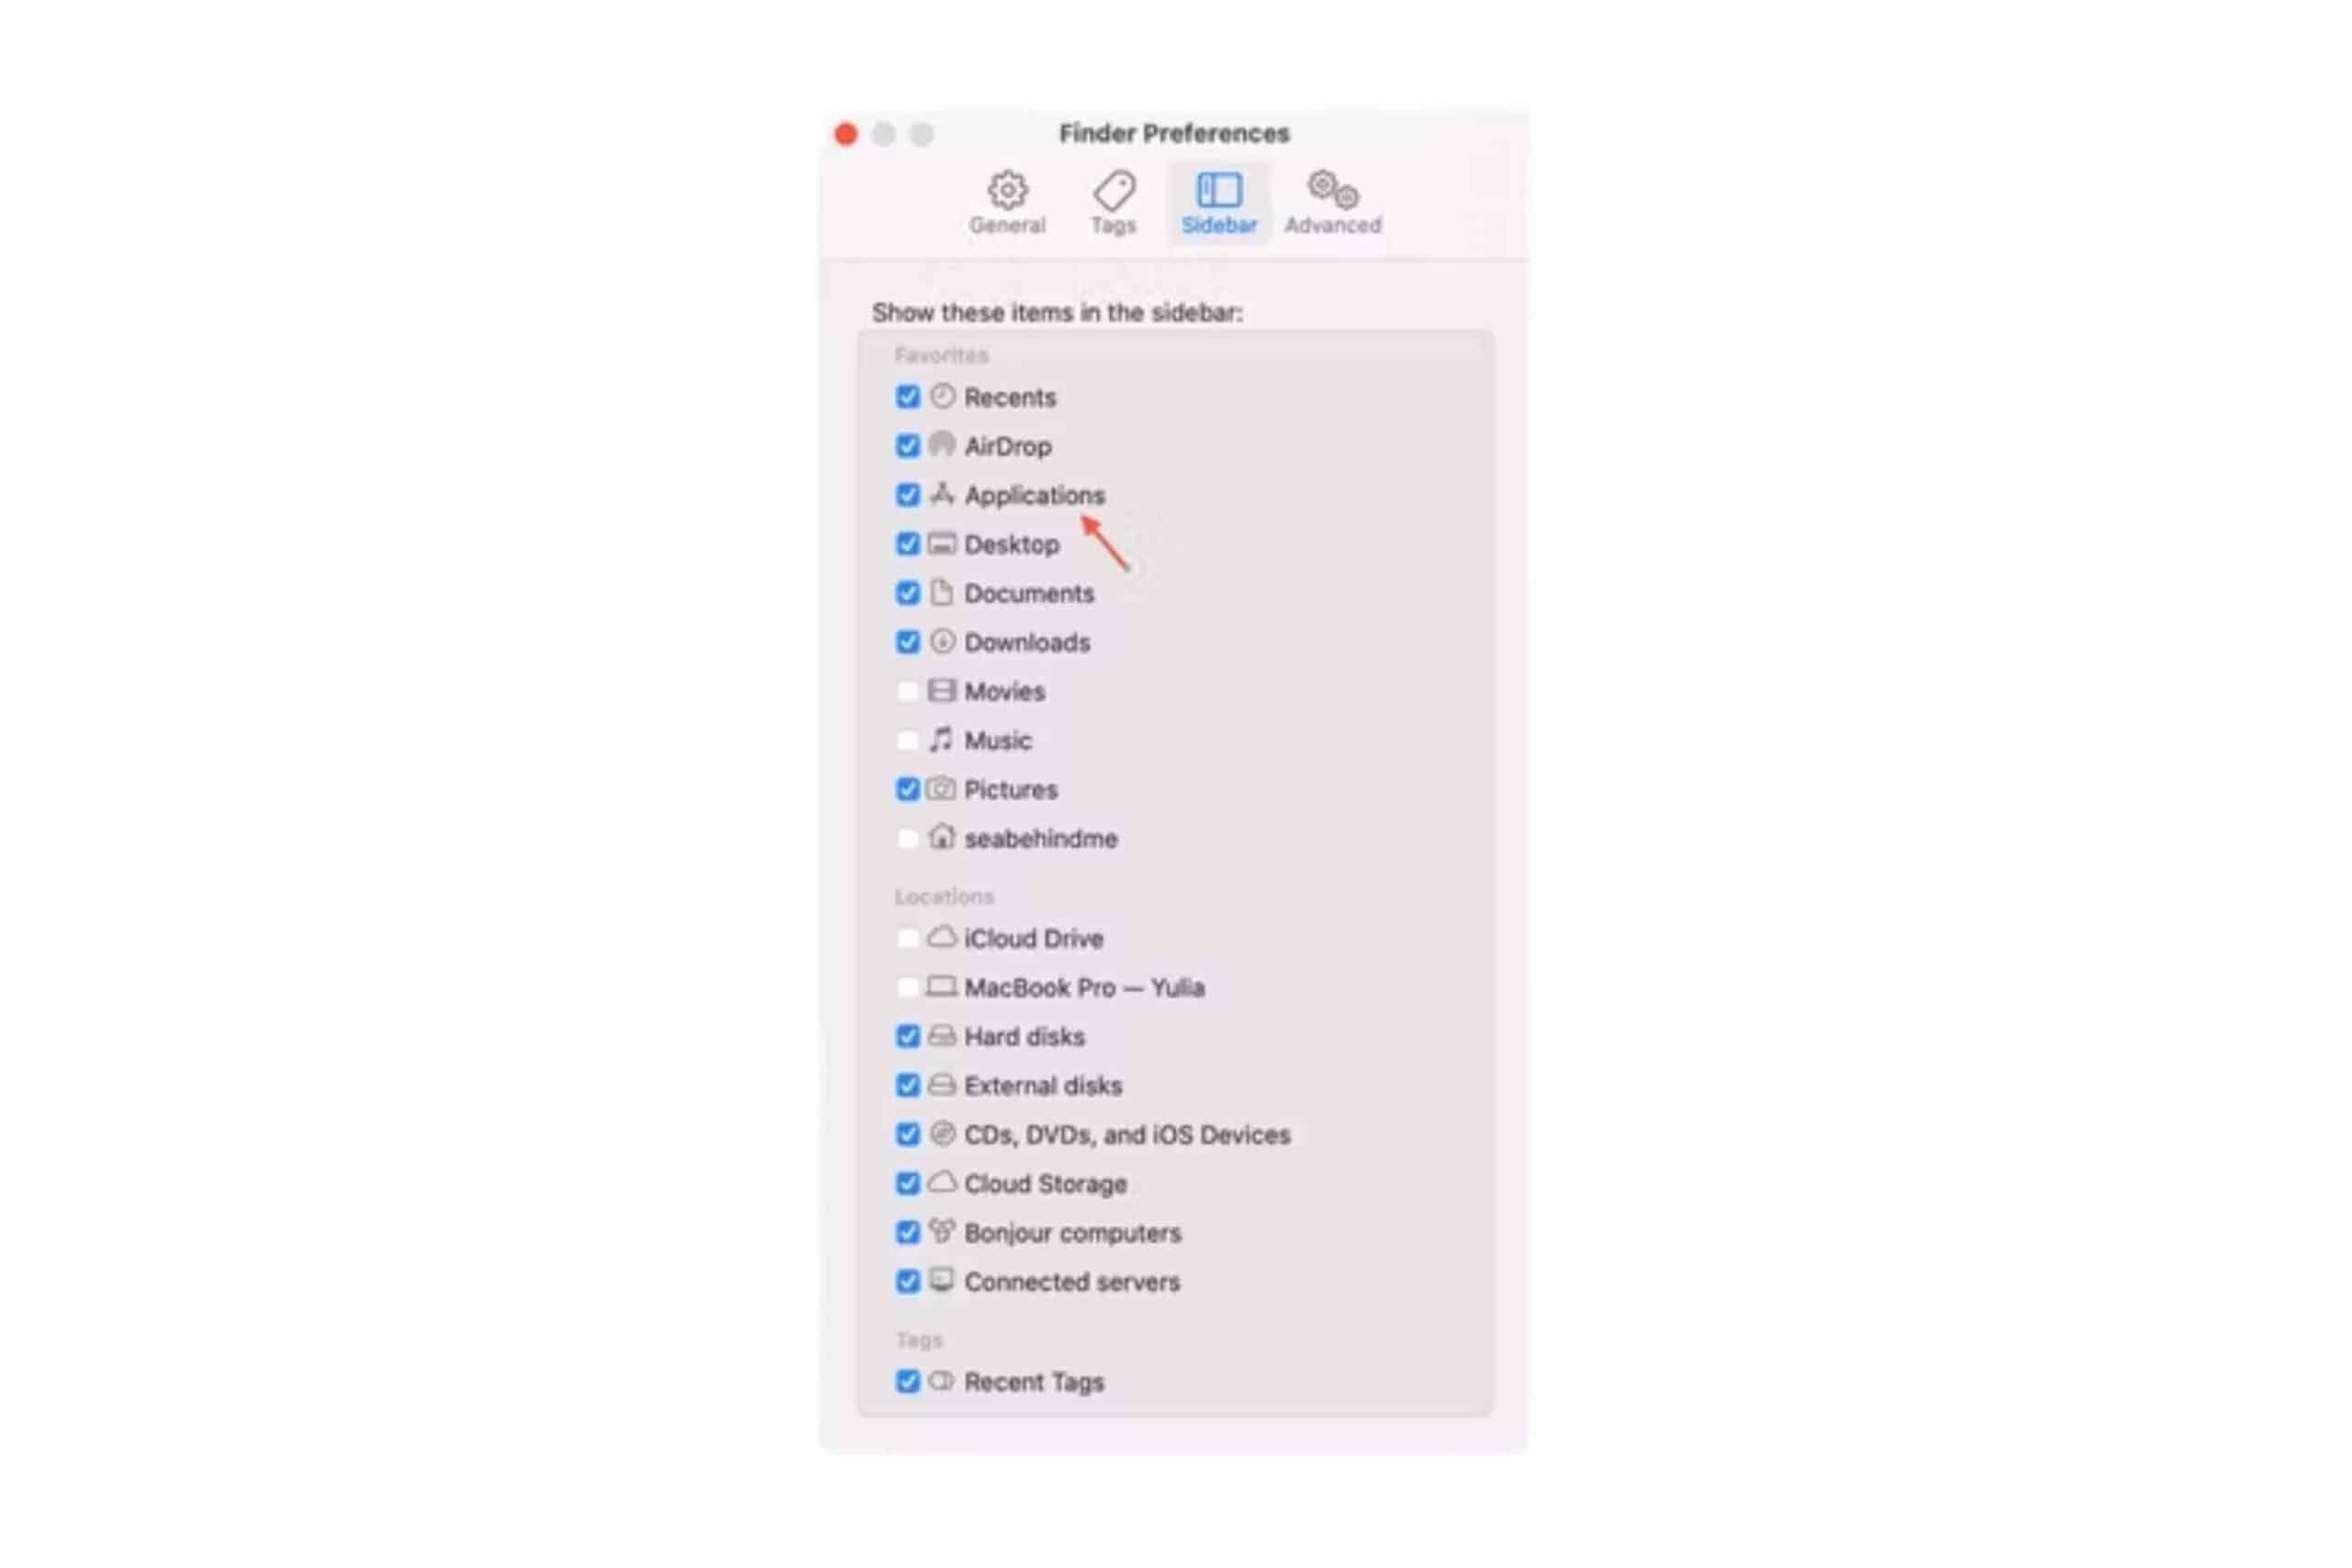 How to Open the Applications Folder From the Finder Sidebar